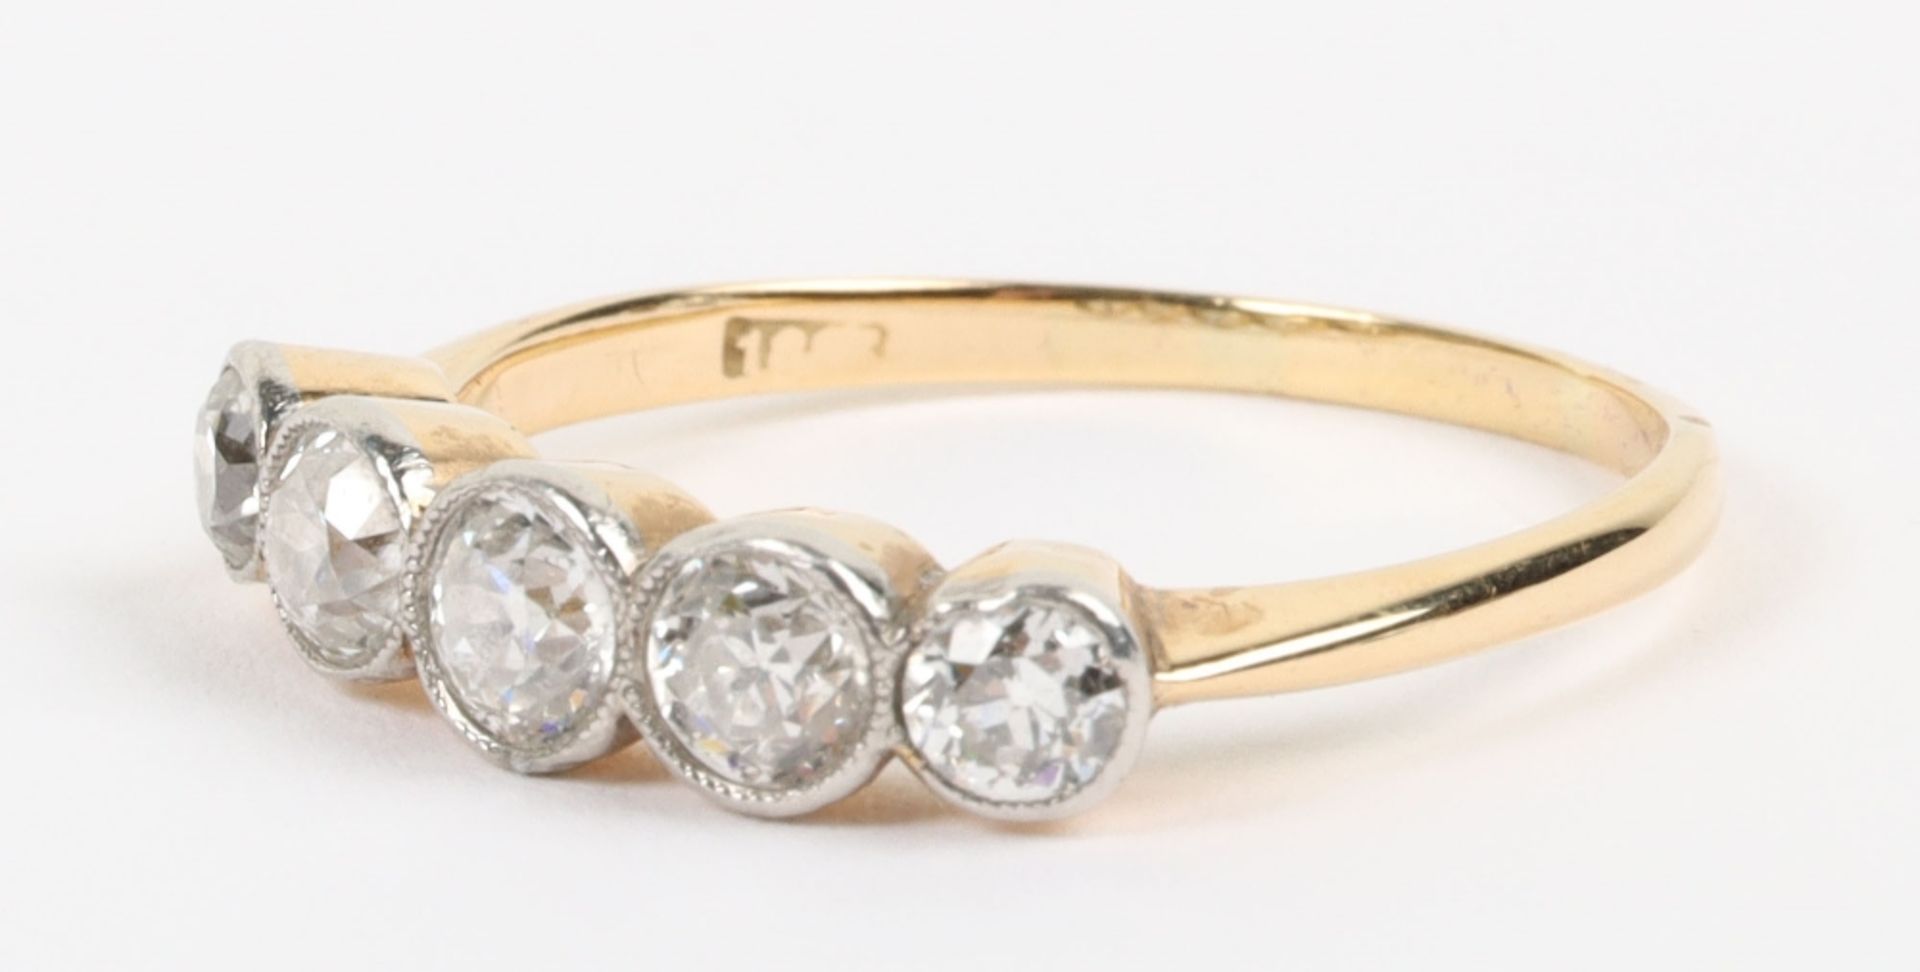 Early 20th century 18ct gold and five stone diamond ring - Image 3 of 5